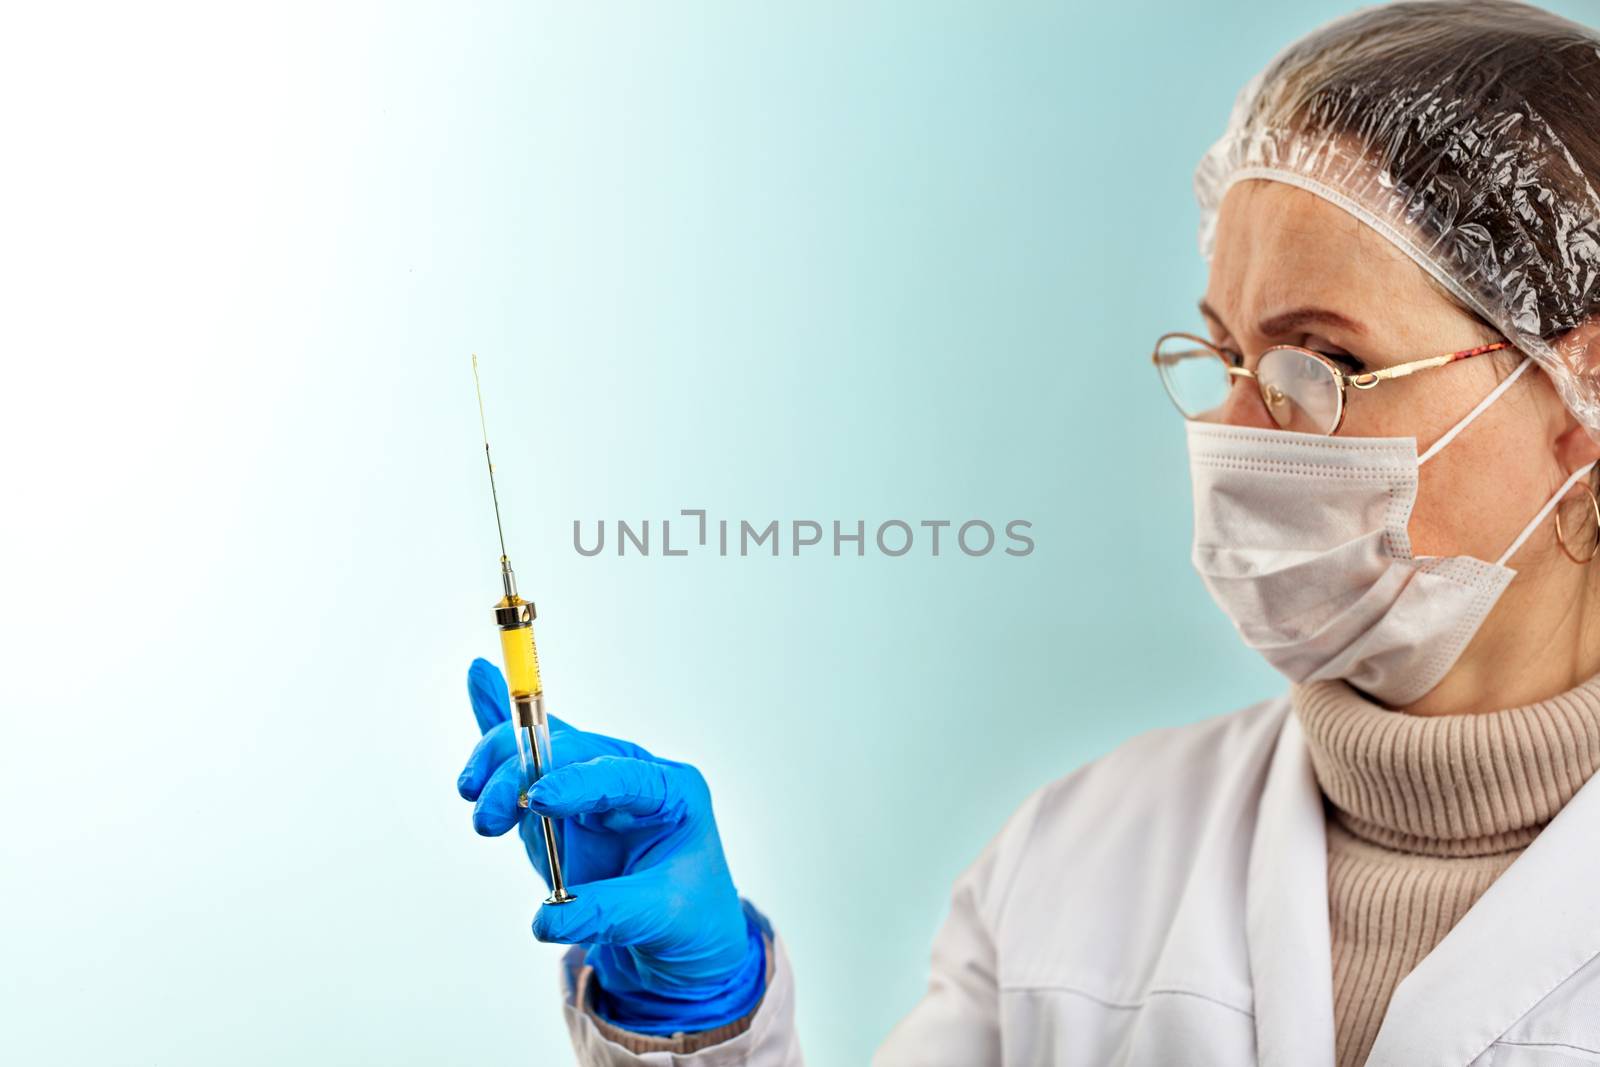 A doctor in a latex medical glove checks the vaccine from a small syringe. The concept of protection against viruses. Medical theme on a light turquoise background. by Sergii